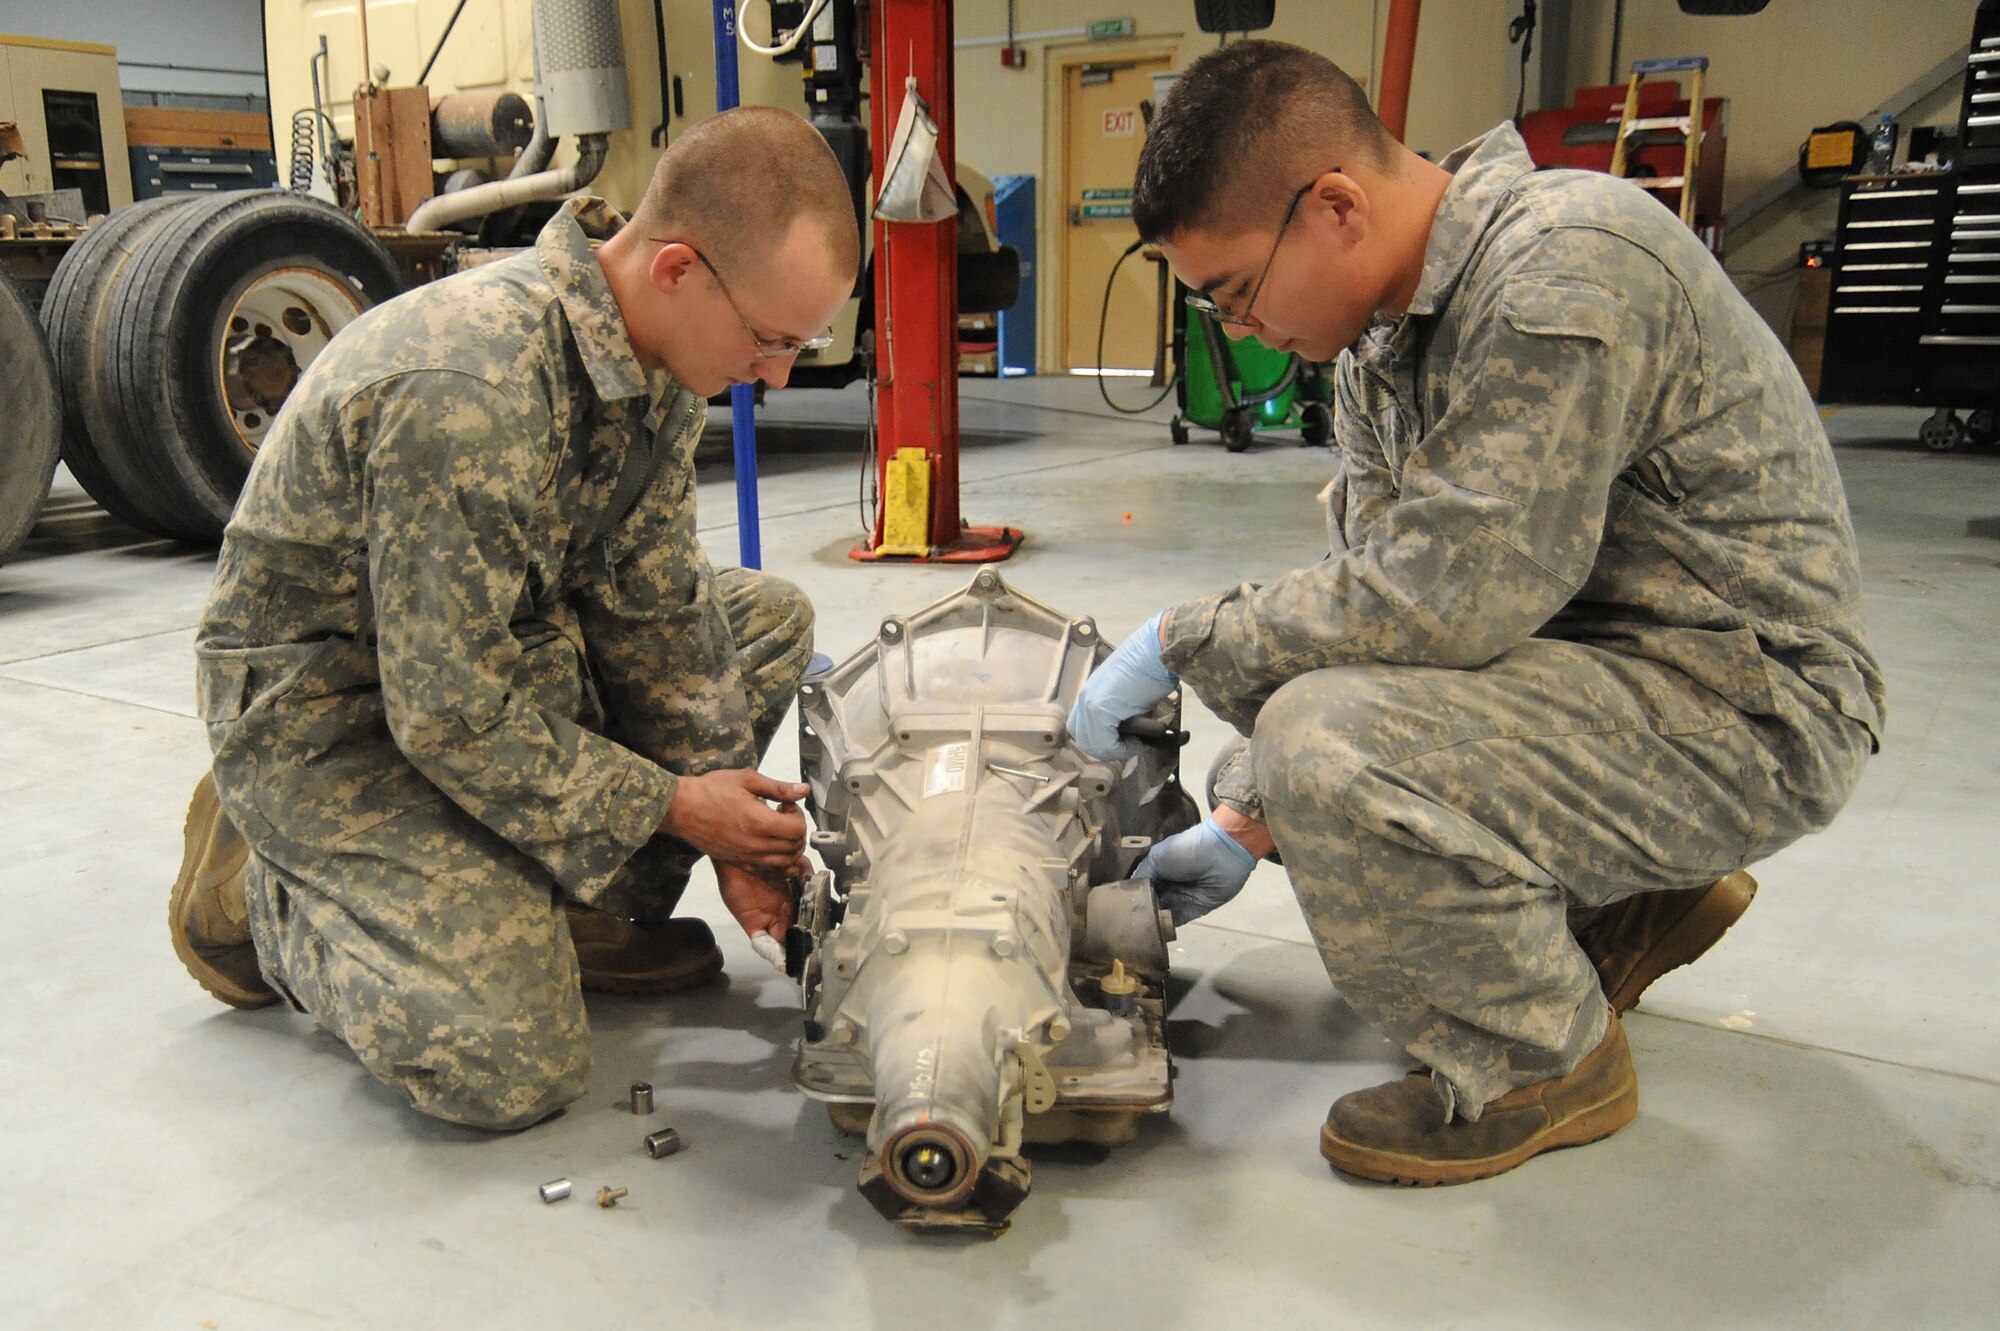 Senior Airman Adam Owens and Senior Airman Michael Jakubec, 380th Expeditionary Logistics Readiness Squadron, vehicle maintenance, remove brackets and sensors from an old transmission to be used on a new transmission for a Pontiac GTO, April 26 at an undisclosed location in Southwest Asia. The GTO is used as a chase car to help guide the U-2 Dragon Lady pilots during take-offs and landings. Airman Owens is deployed from 174th Air National Guard Base, Hancock Field, N.Y. and hails from Binghamton, N.Y. Airman Jakubec is deployed from Kadena AB, Japan and hails from Spanaway Wash.  (U.S. Air Force photo by Senior Airman Brian J. Ellis) (Released)